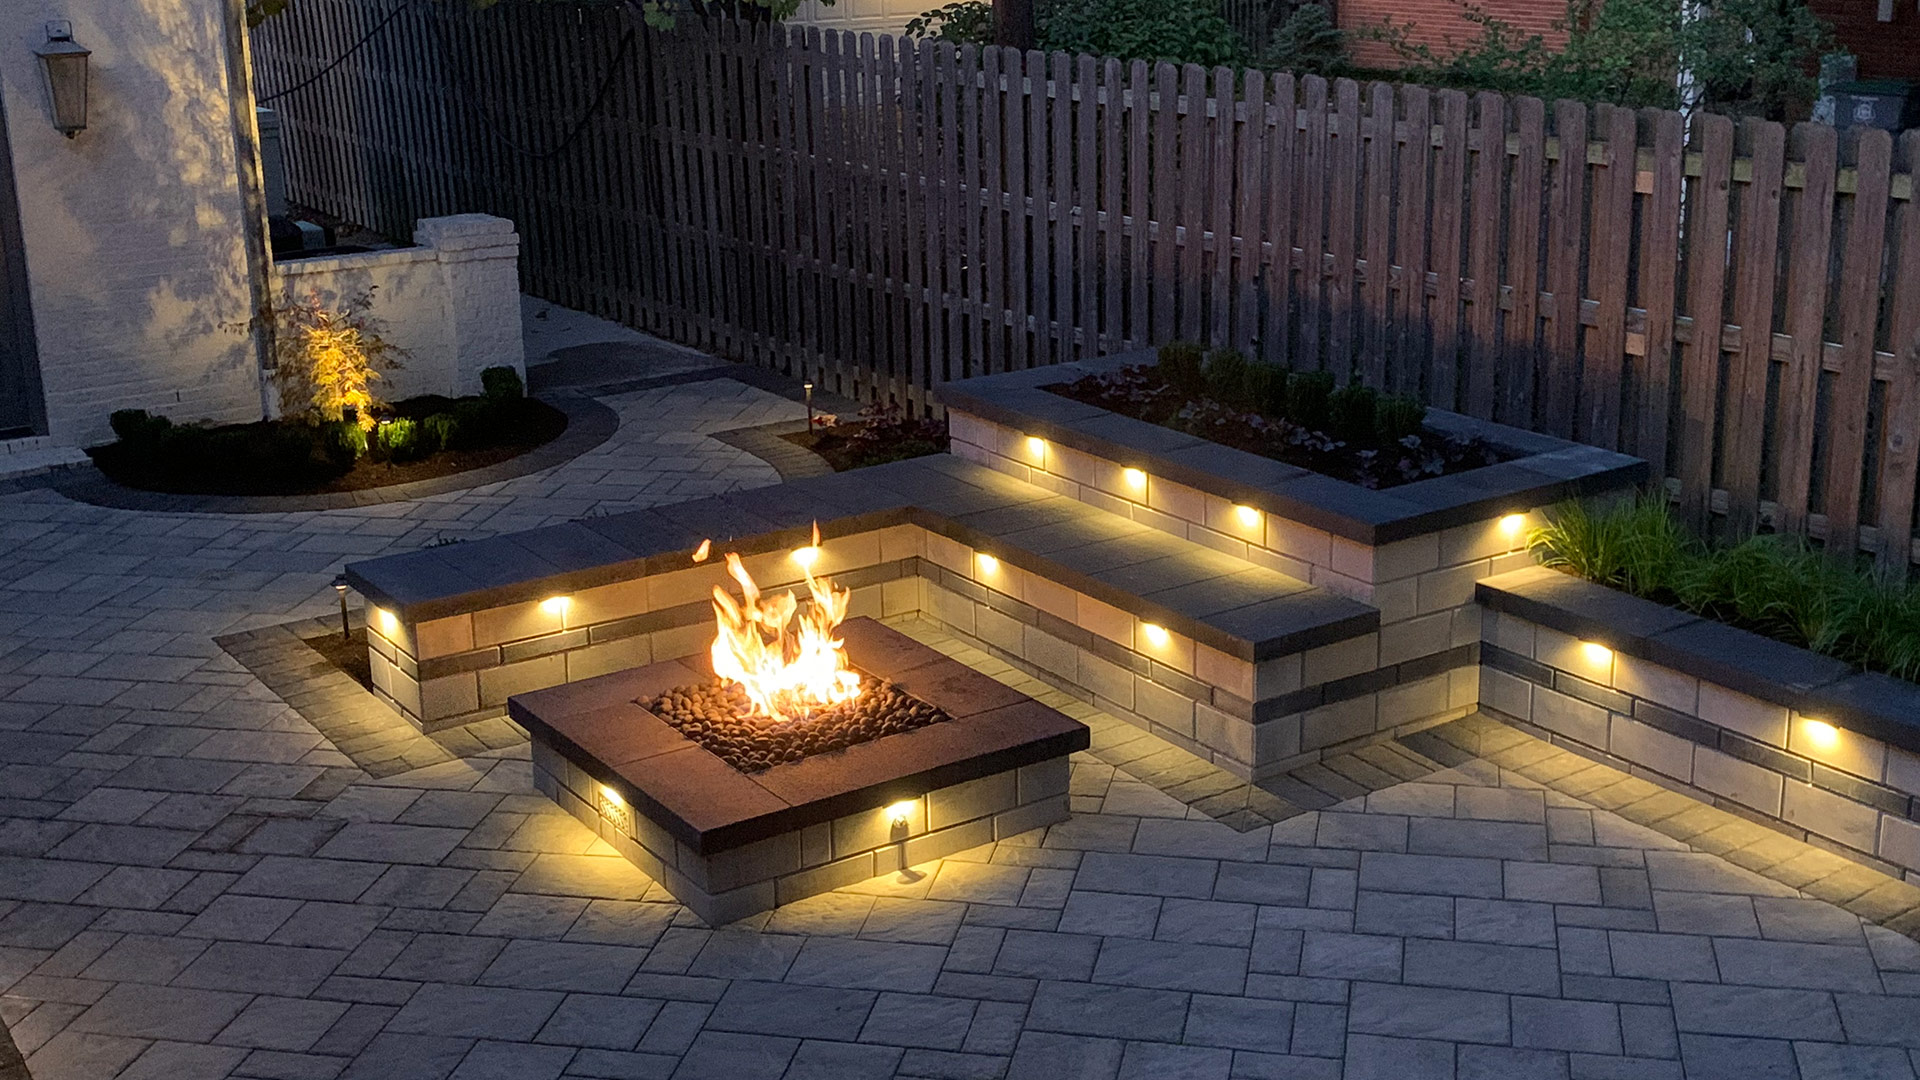 Chilly Weather Is upon Us - Do You Have a Fire Pit Yet?